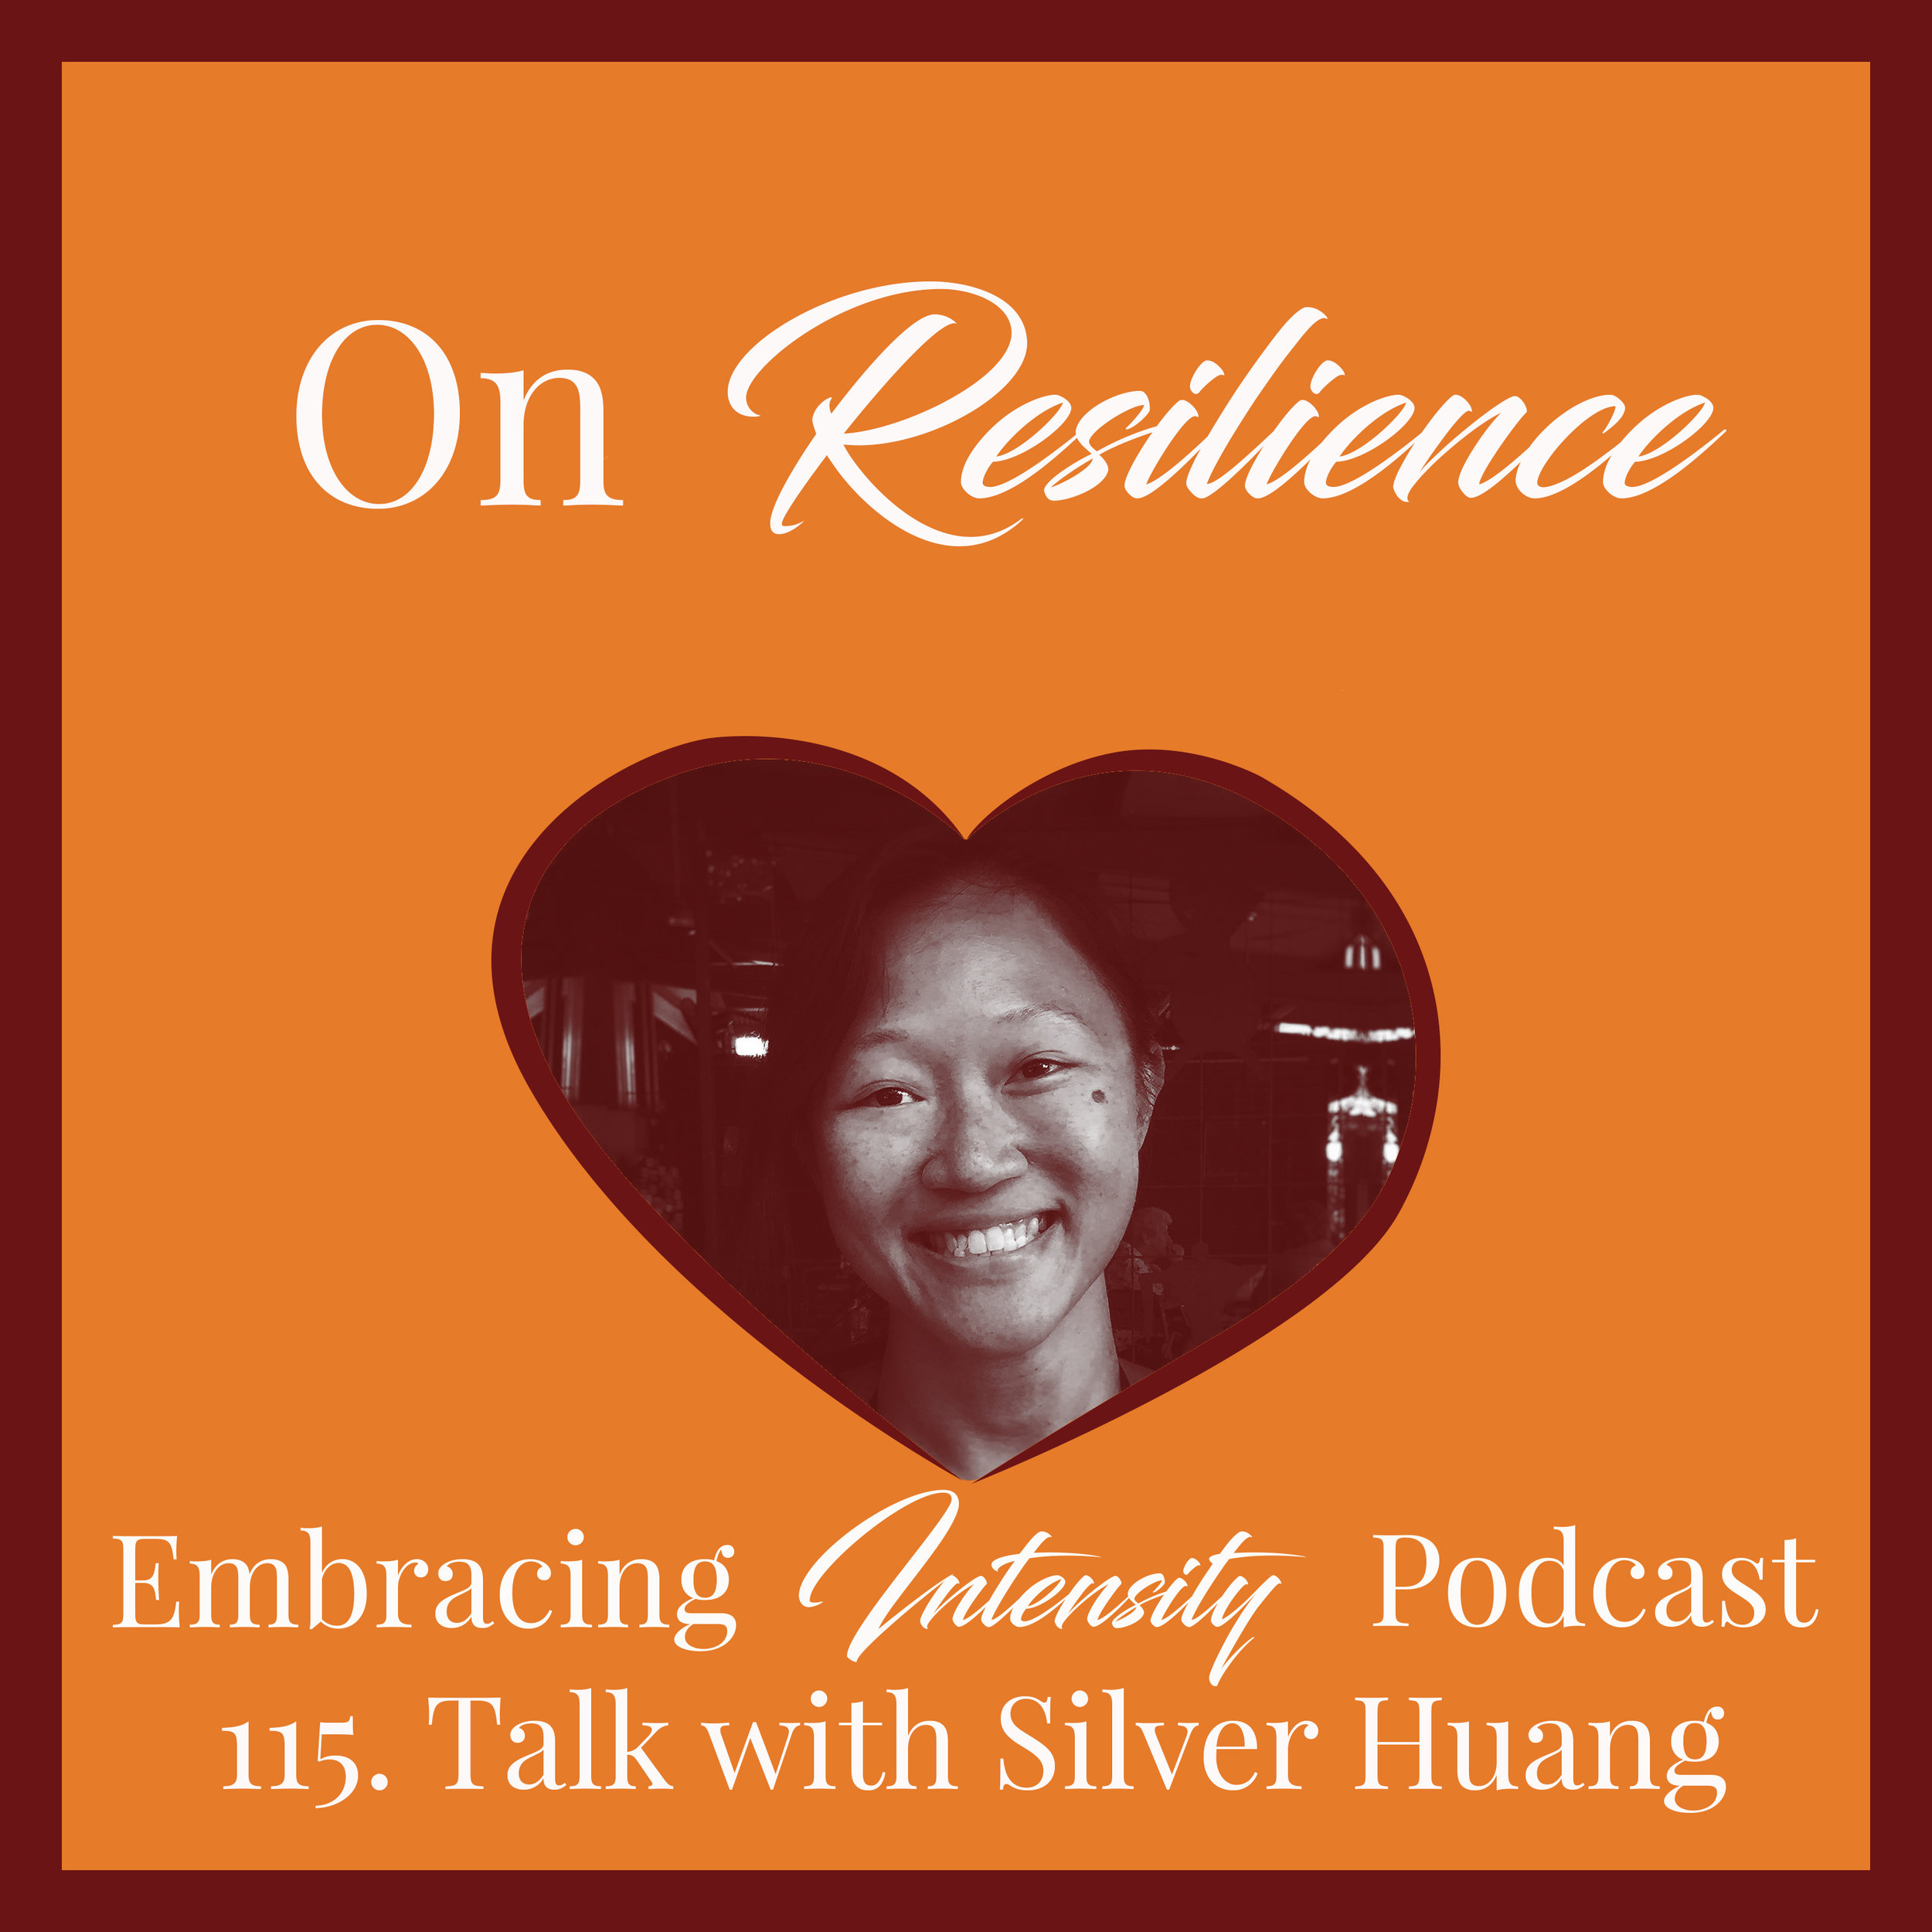 On Resilience with Silver Huang